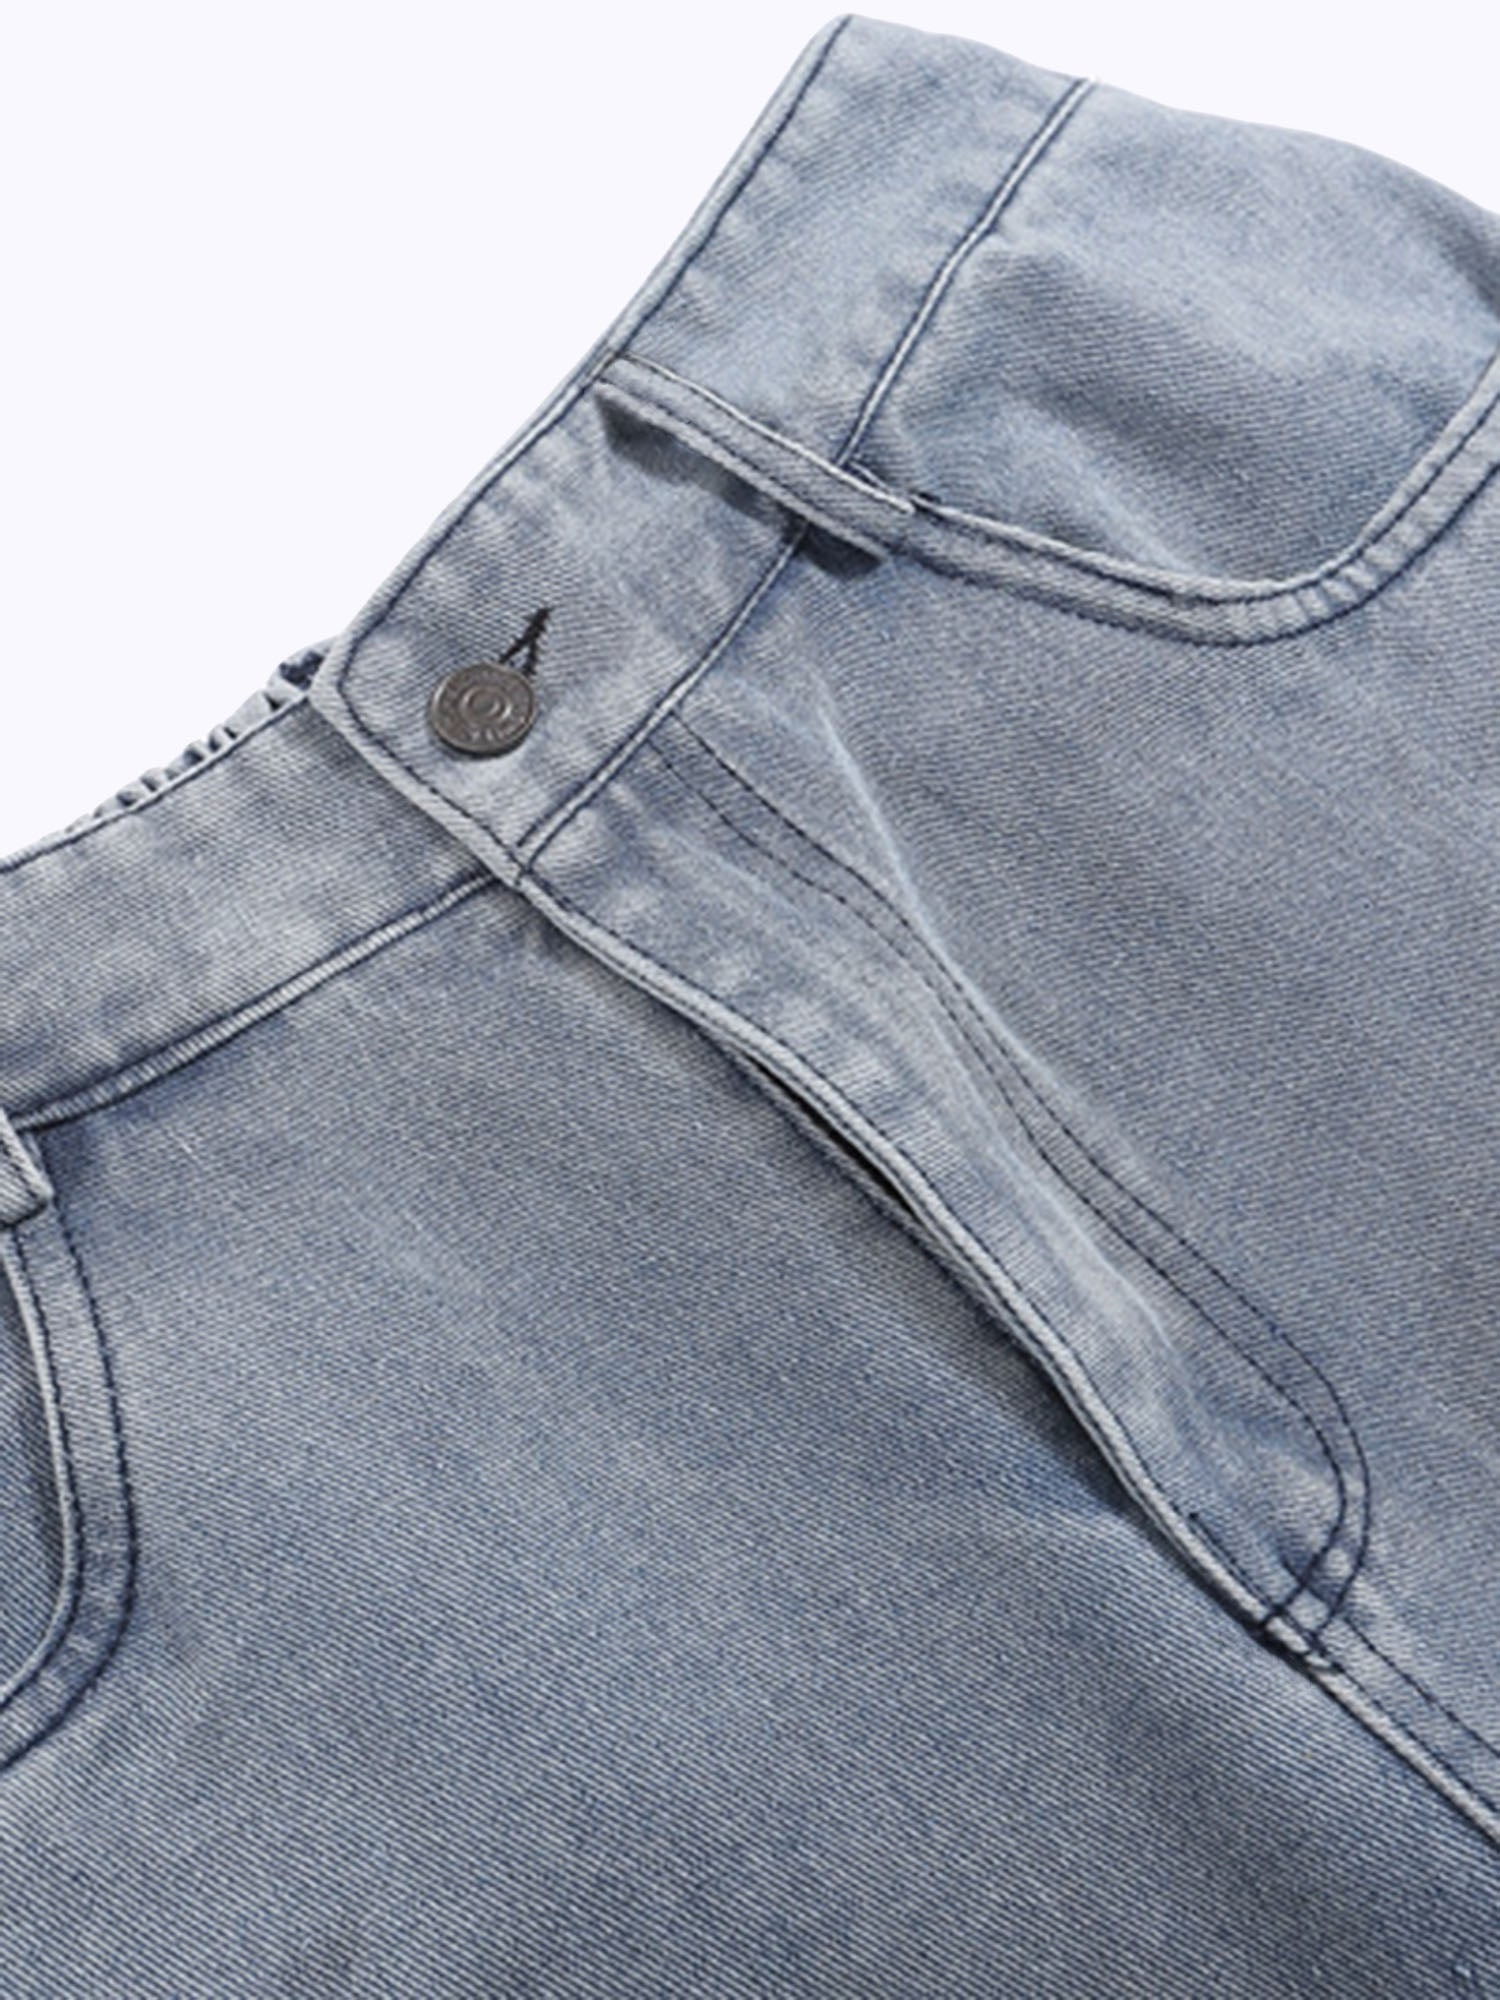 Thesupermade Creative Design Street Hip Hop Washed Jeans